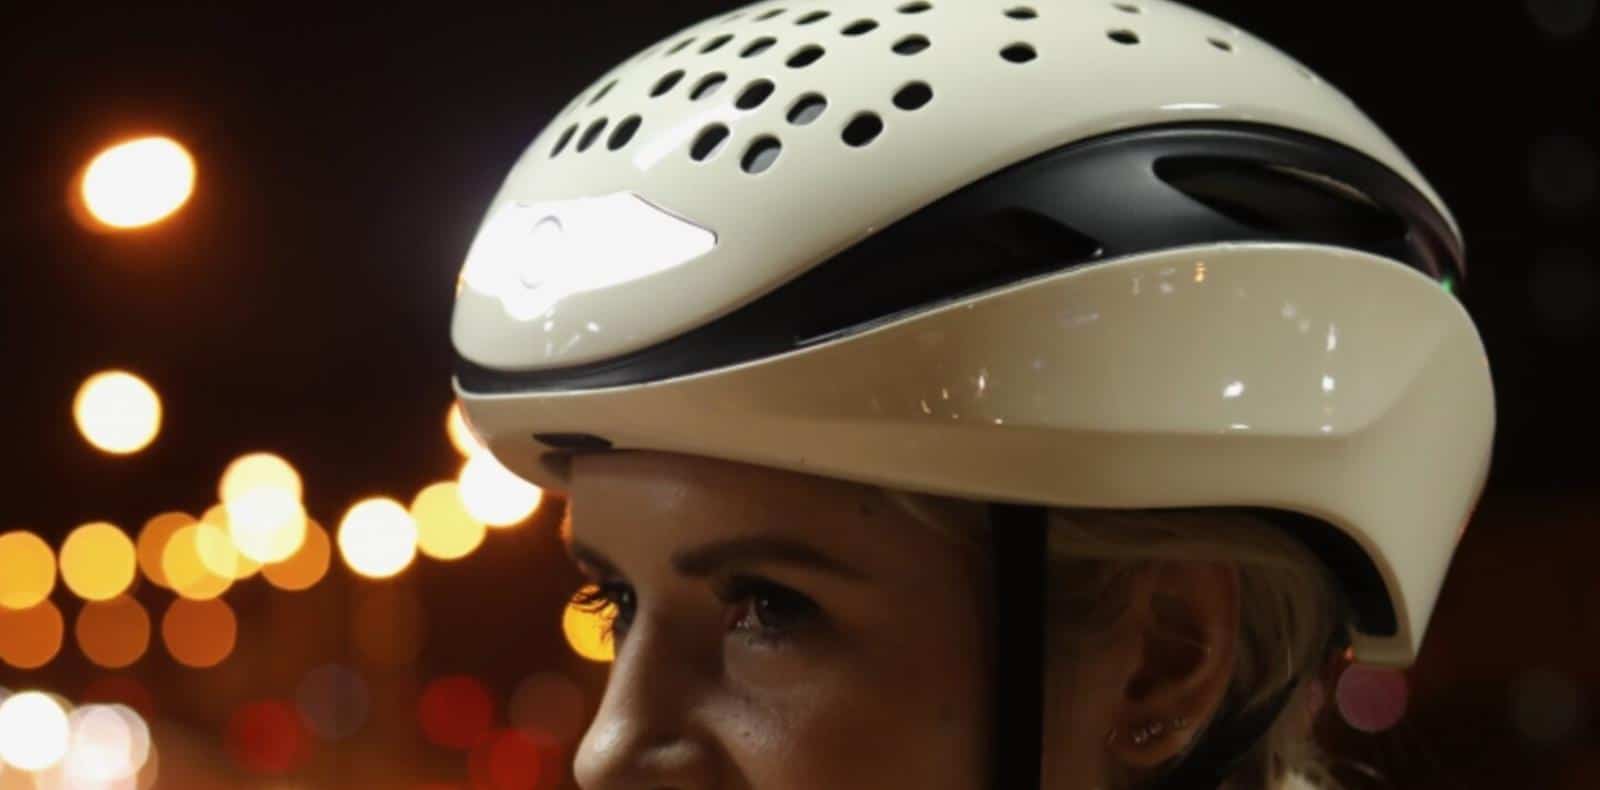 The Relee M1 bicycle helmet is distinguished by several technological features